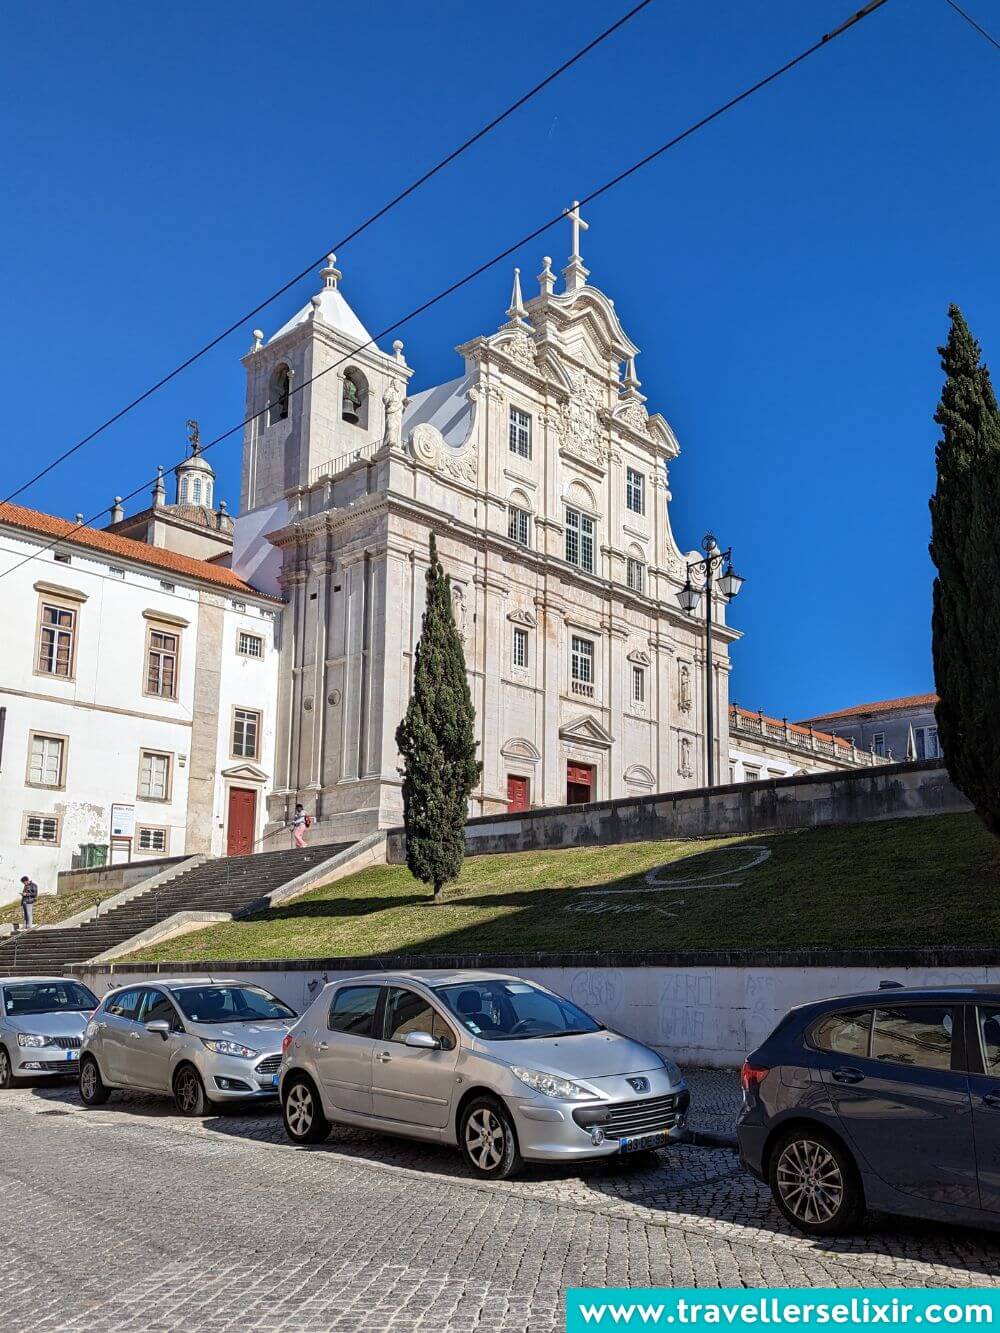 The New Cathedral in Alta, Coimbra.